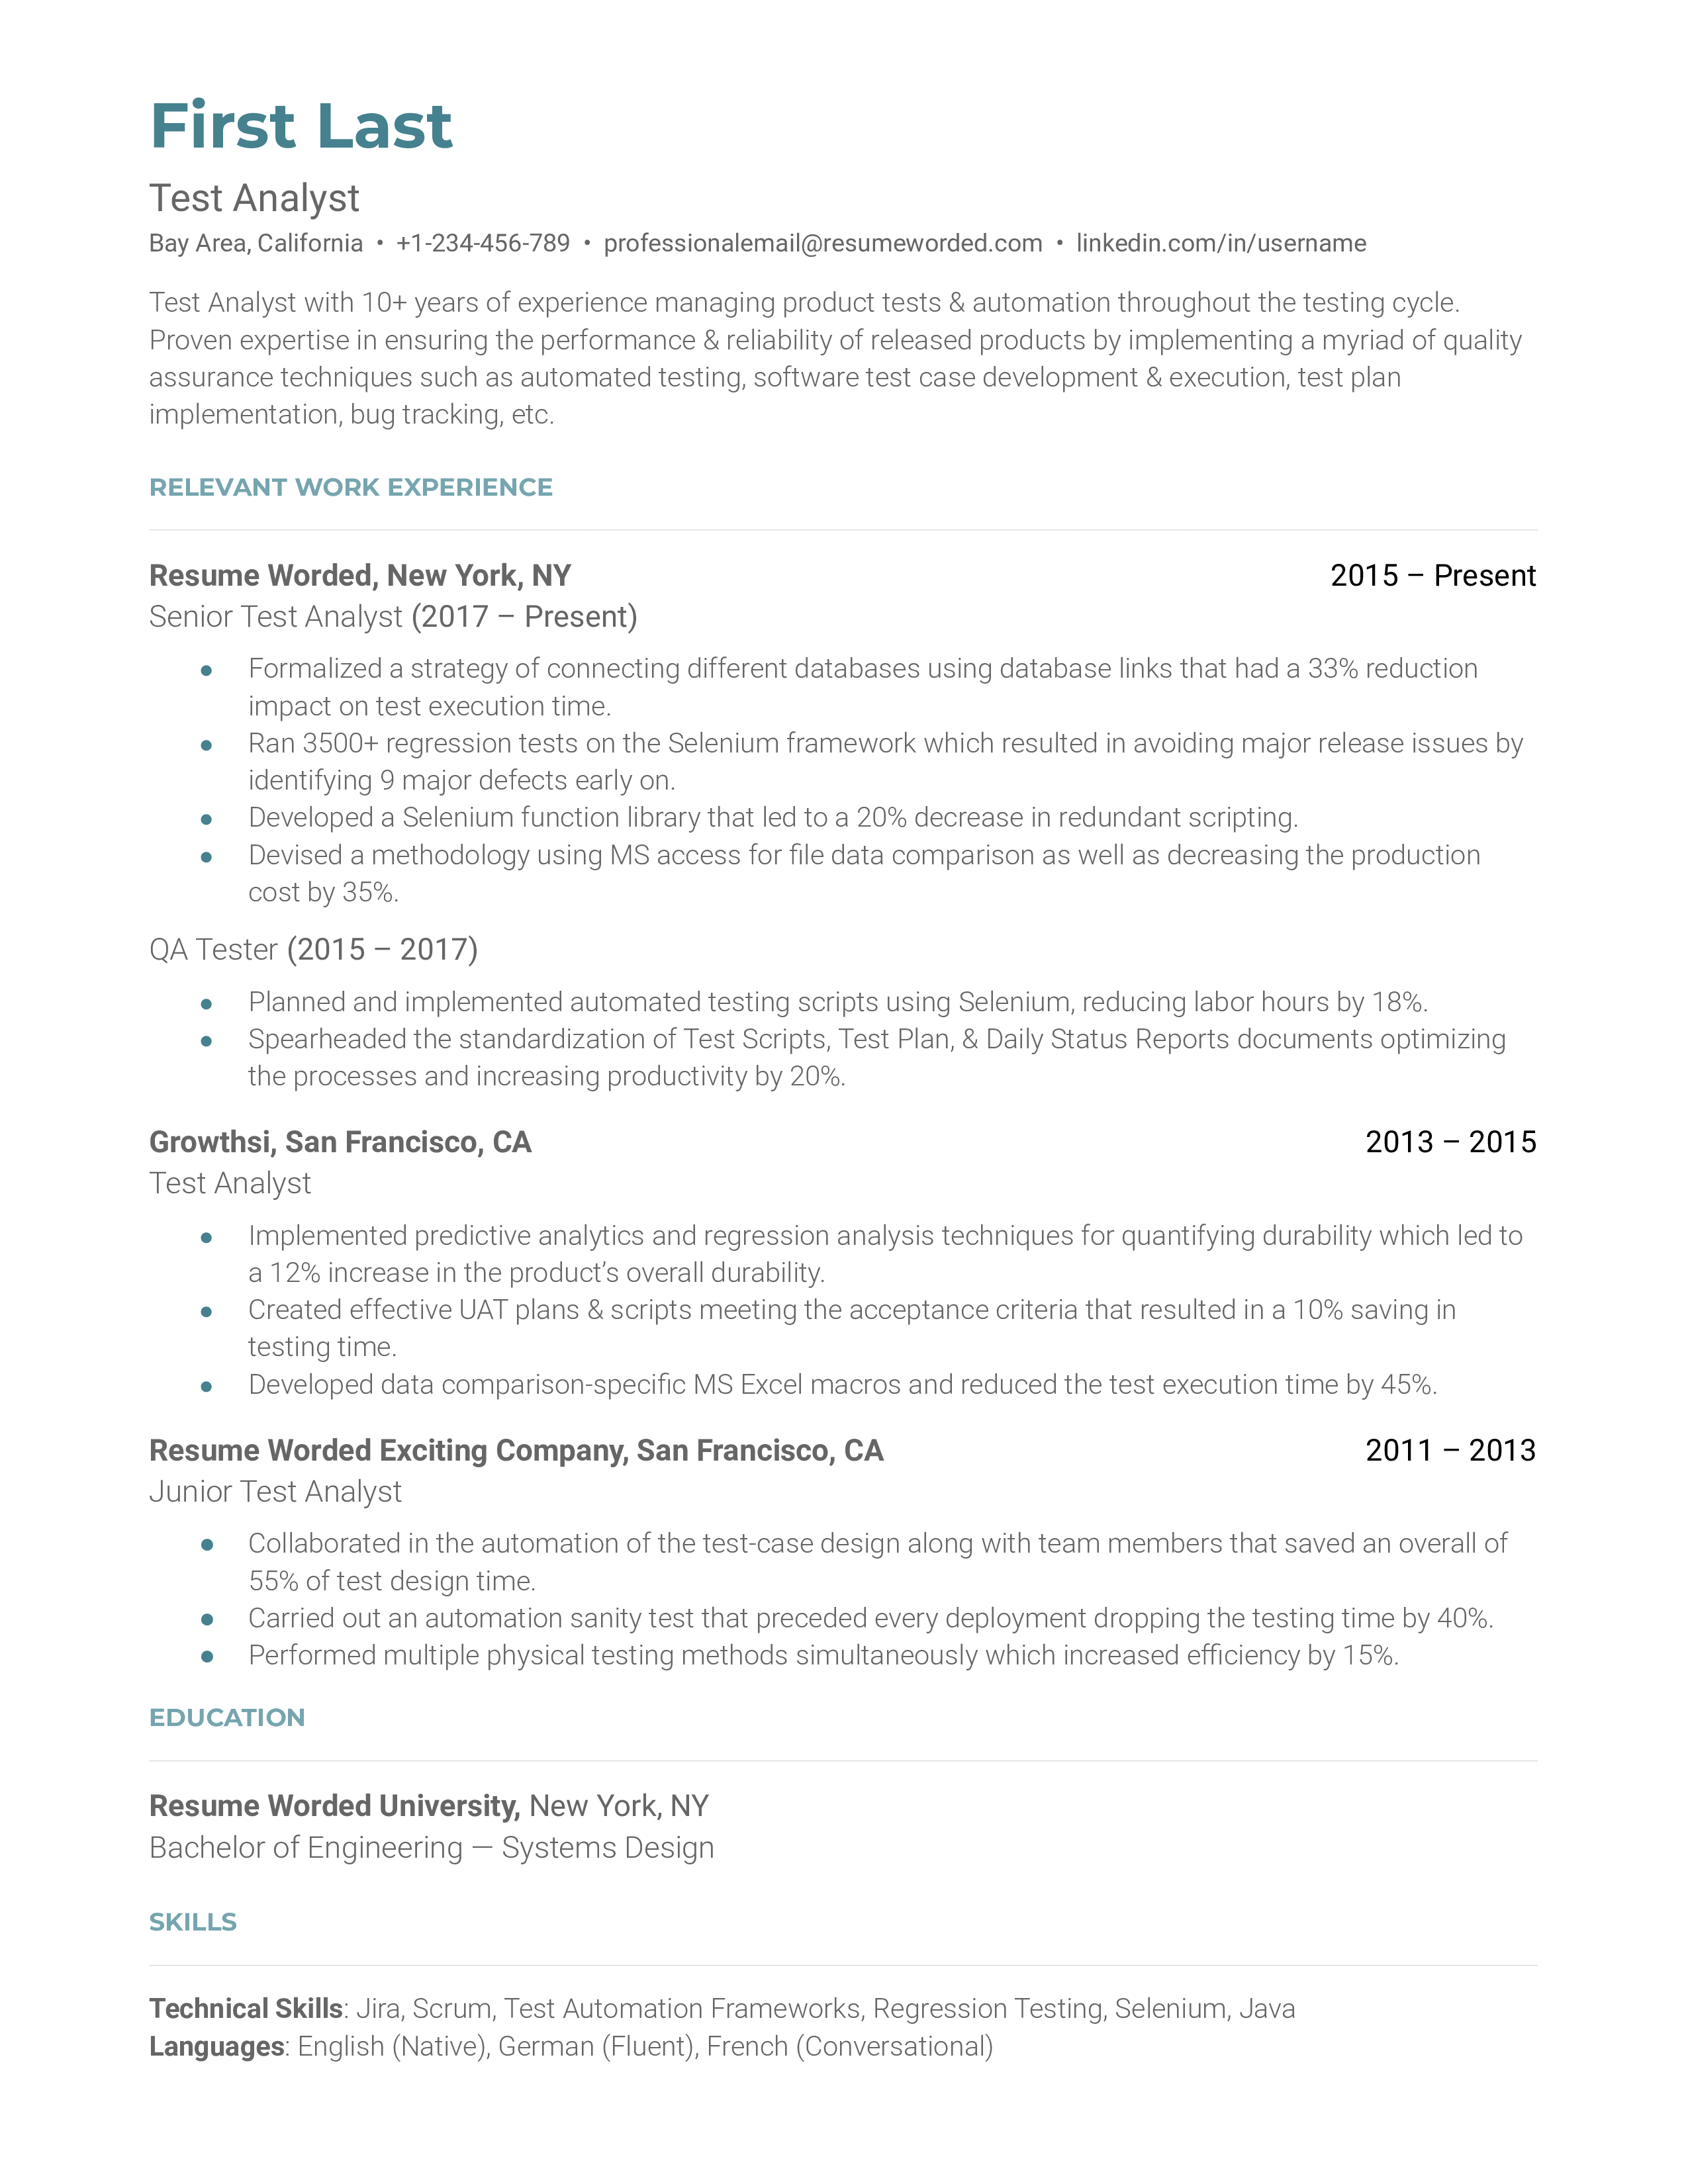 Professional CV of an experienced Test Analyst with detailed technical skills.